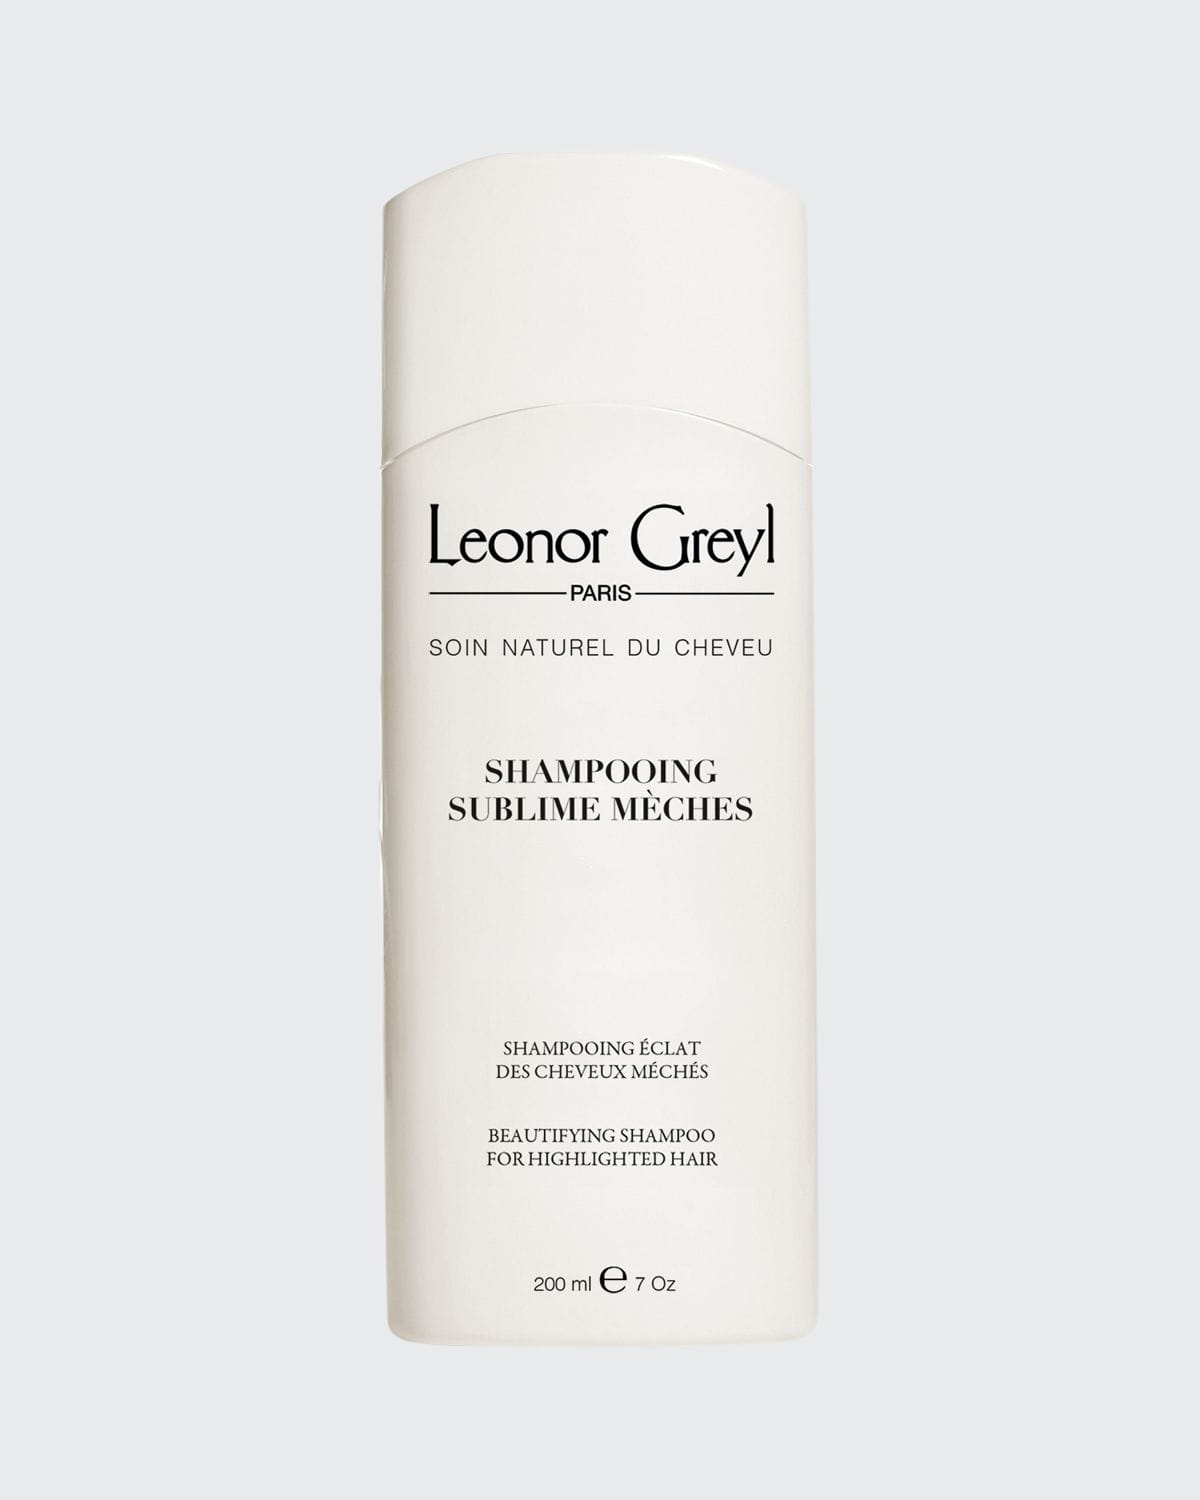 Leonor Greyl Shampooing Sublime M&#232ches (Beautifying Shampoo for Highlighted Hair), 7.0 oz./ 200 mL